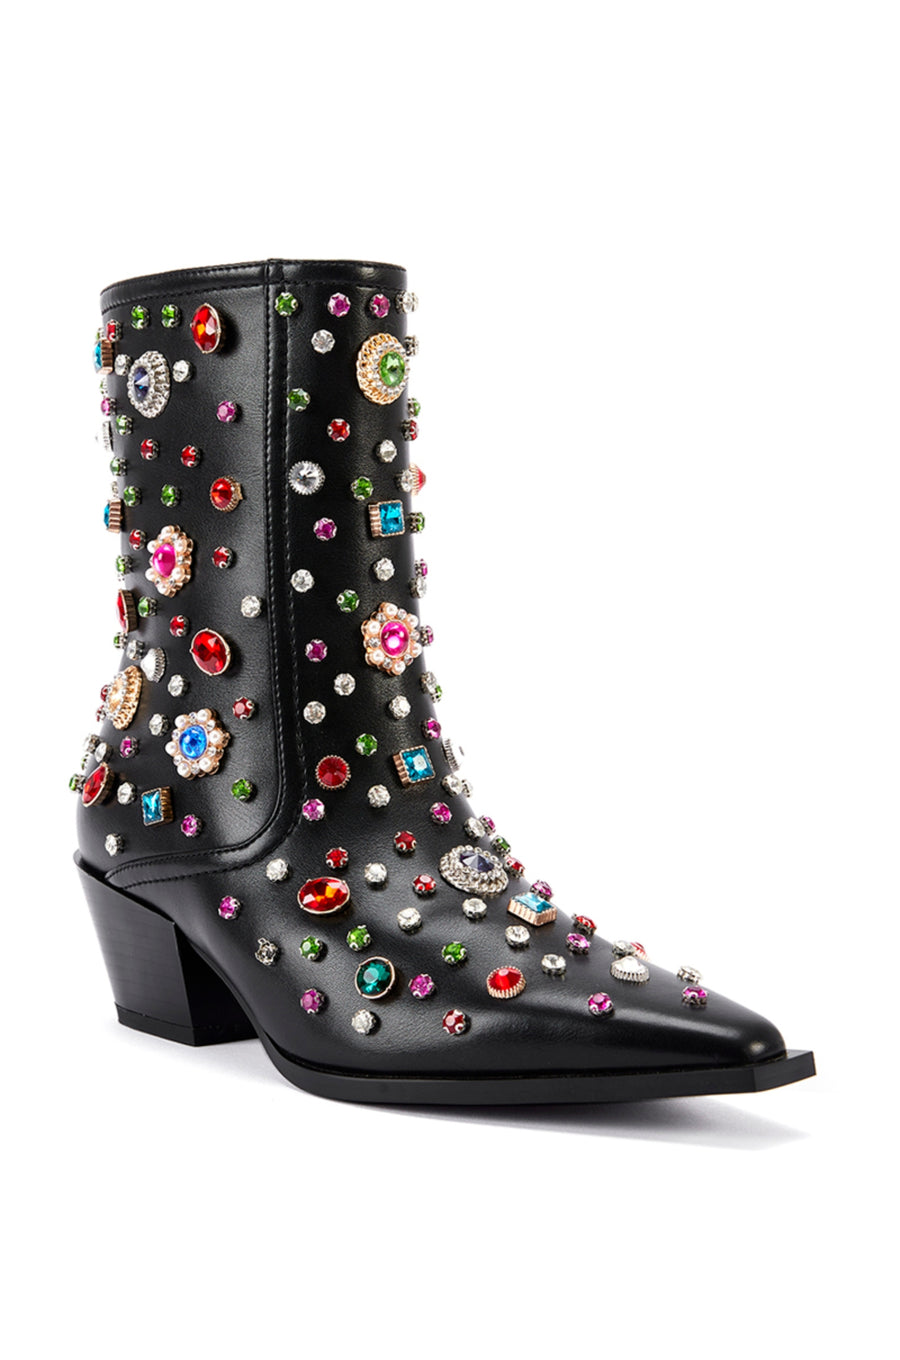 angled view of black faux leather western bootie with classic cowboy bootie silhouette and multicolored rhinestone gem embellished accents